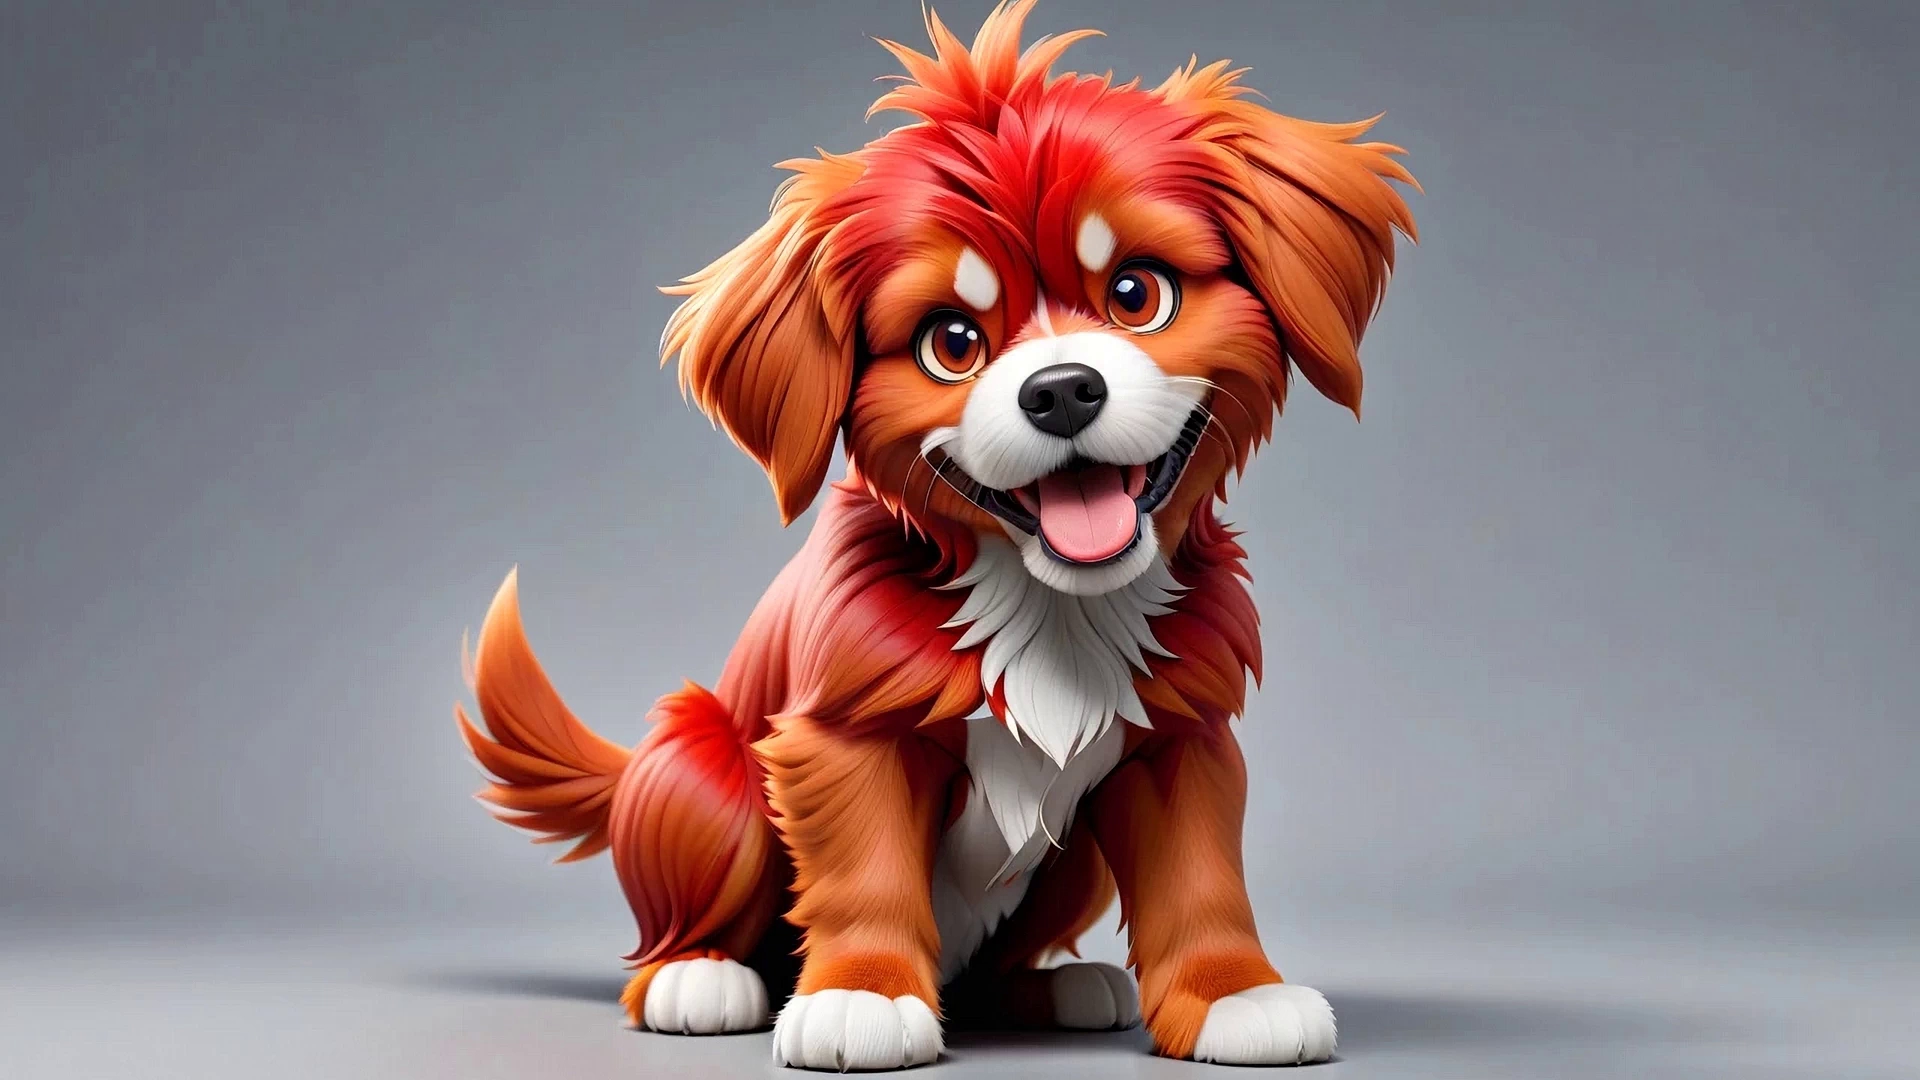 Red funny dog on gray background